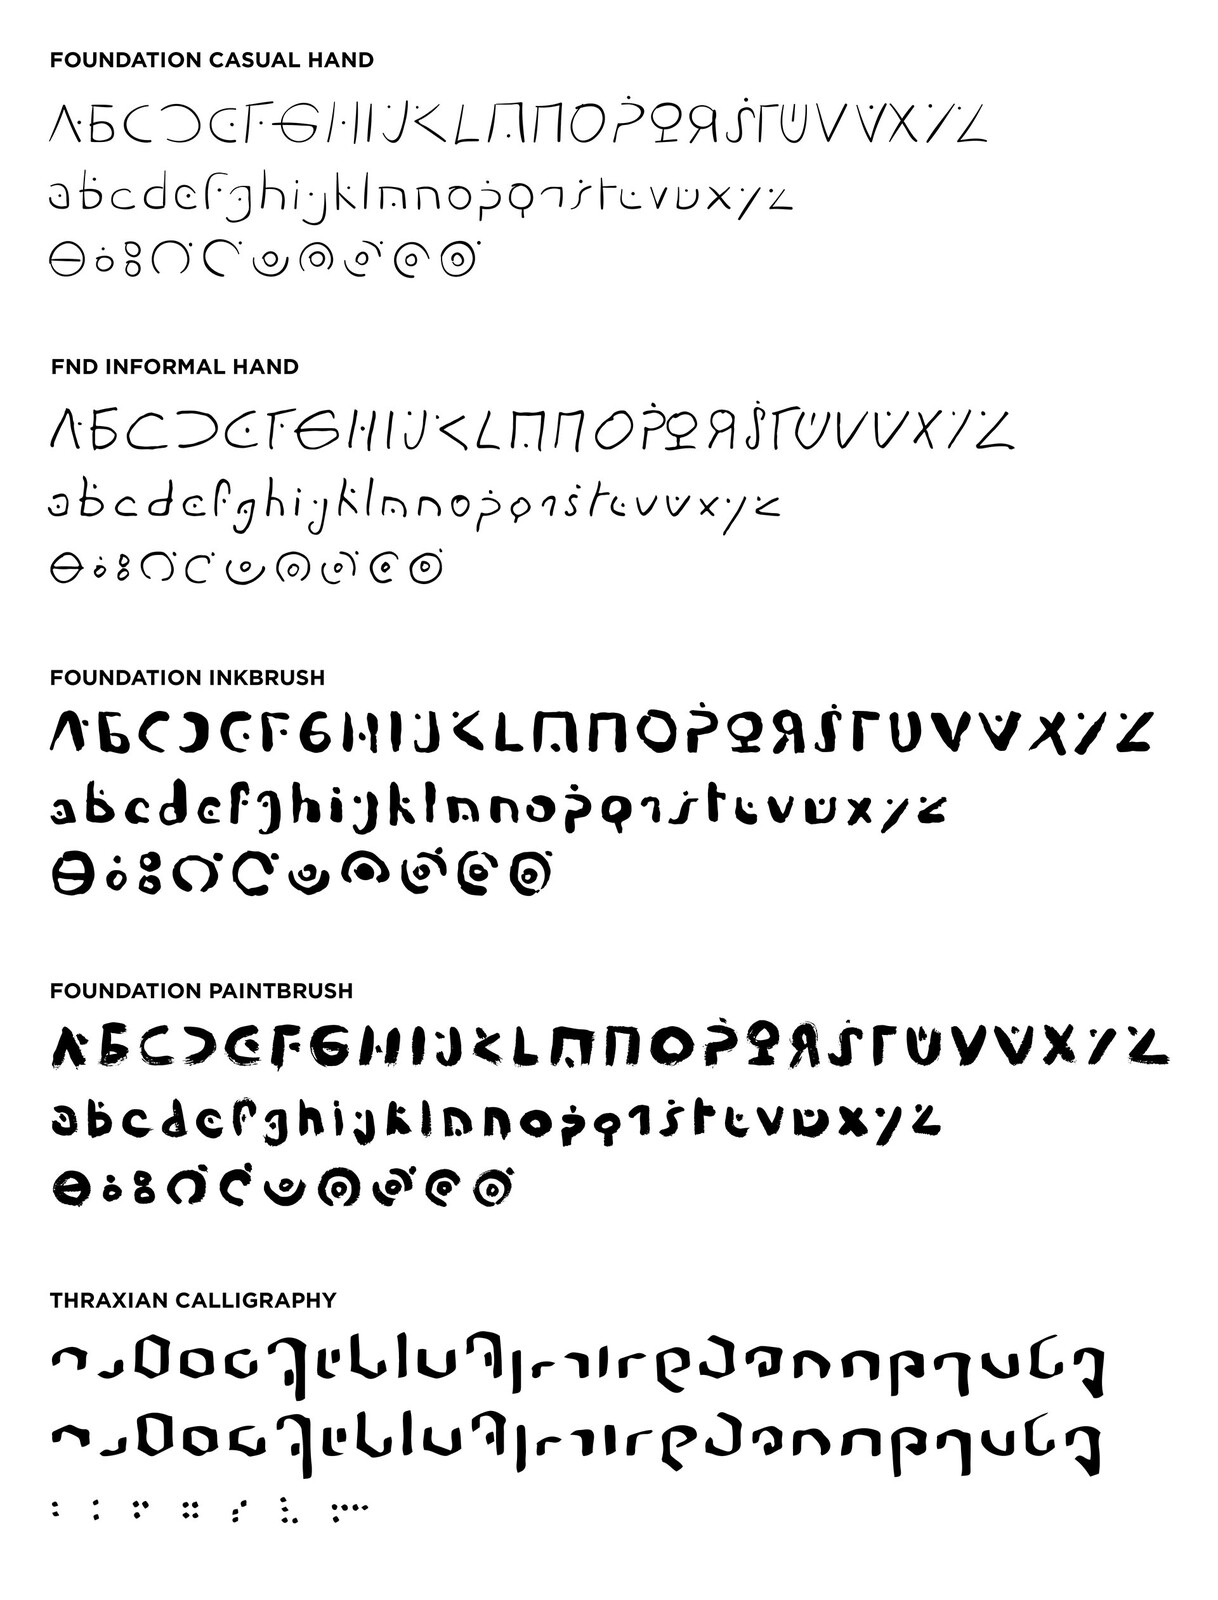 Each glyph has multiple versions  with slight differences, making a body of text appear to be naturally written by hand.